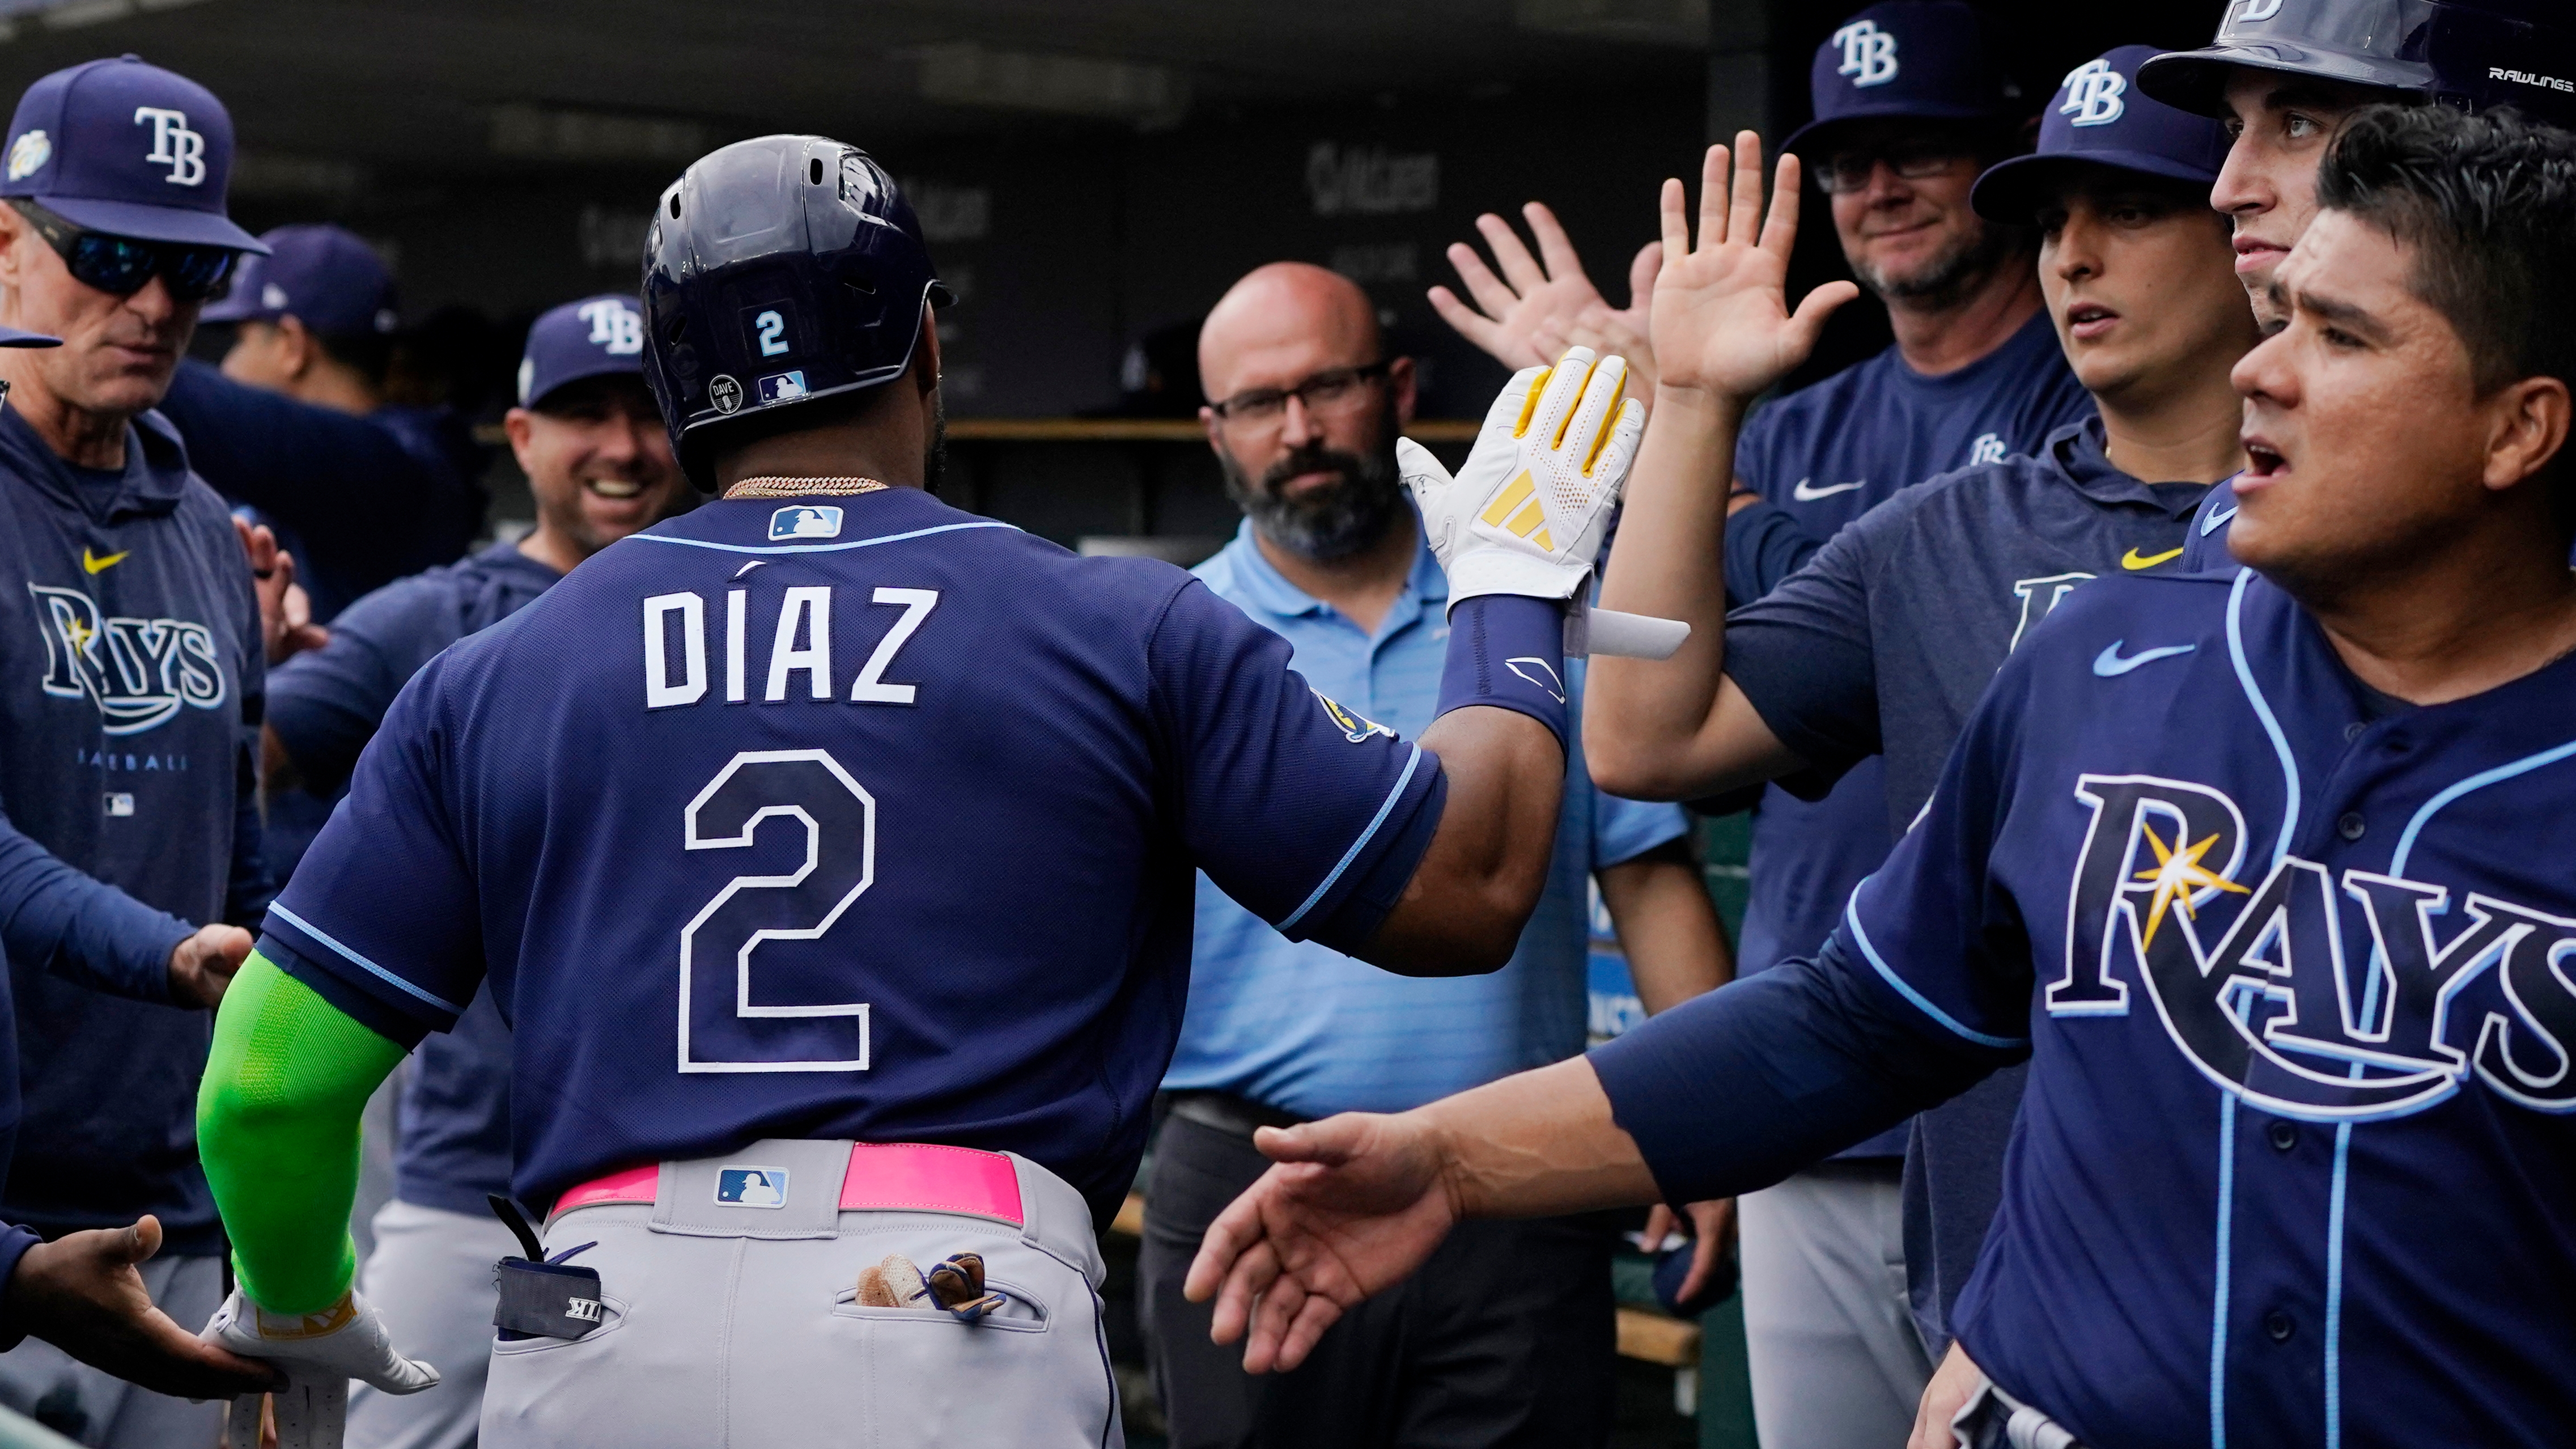 Rays beat Tigers for third straight series win to close out road trip